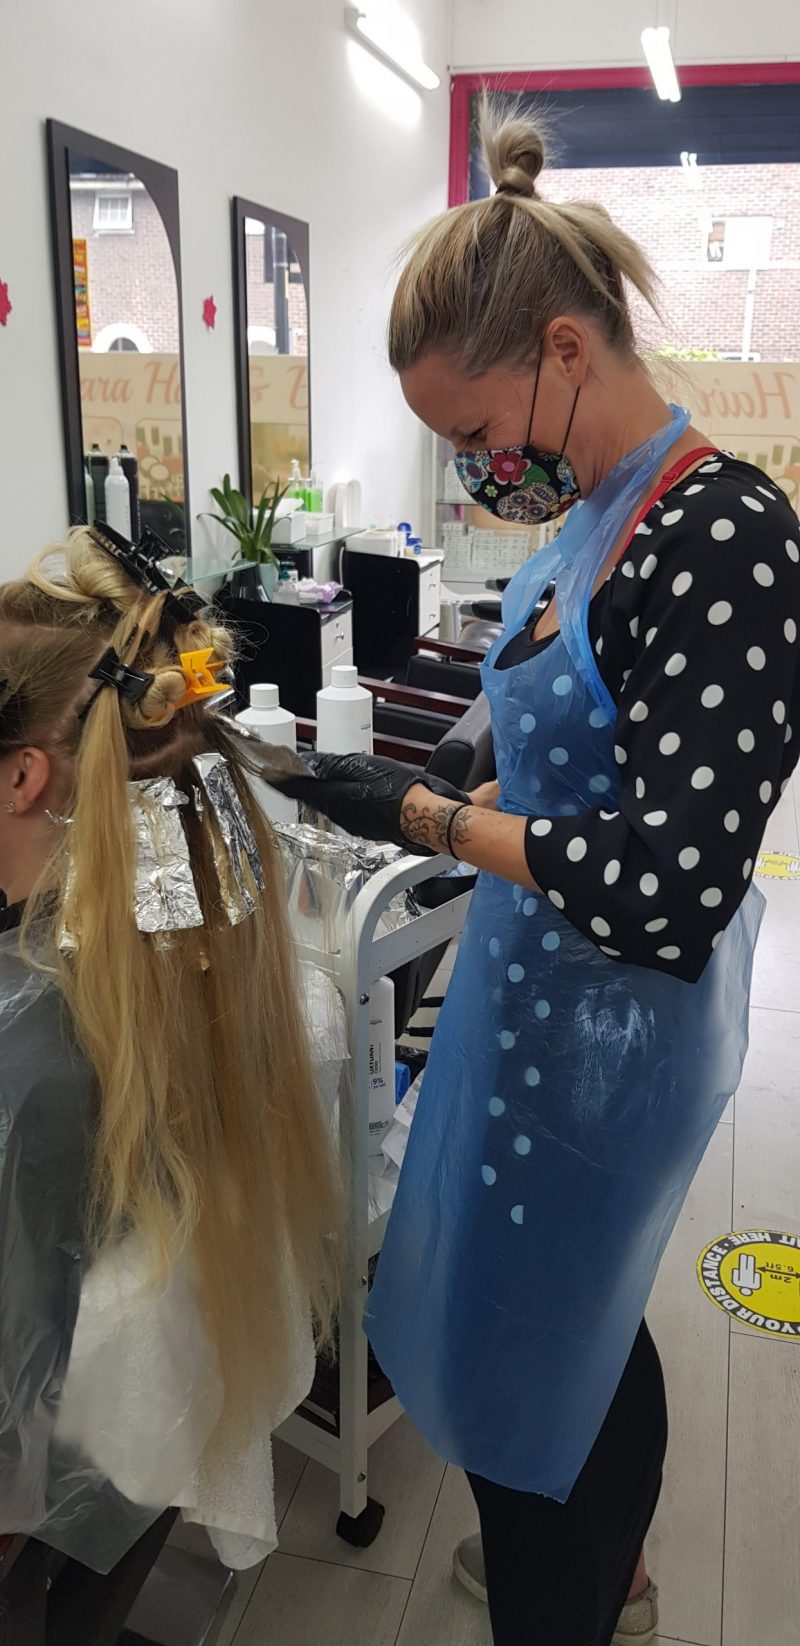 Gain Valuable Skills with an NVQ Hairdressing